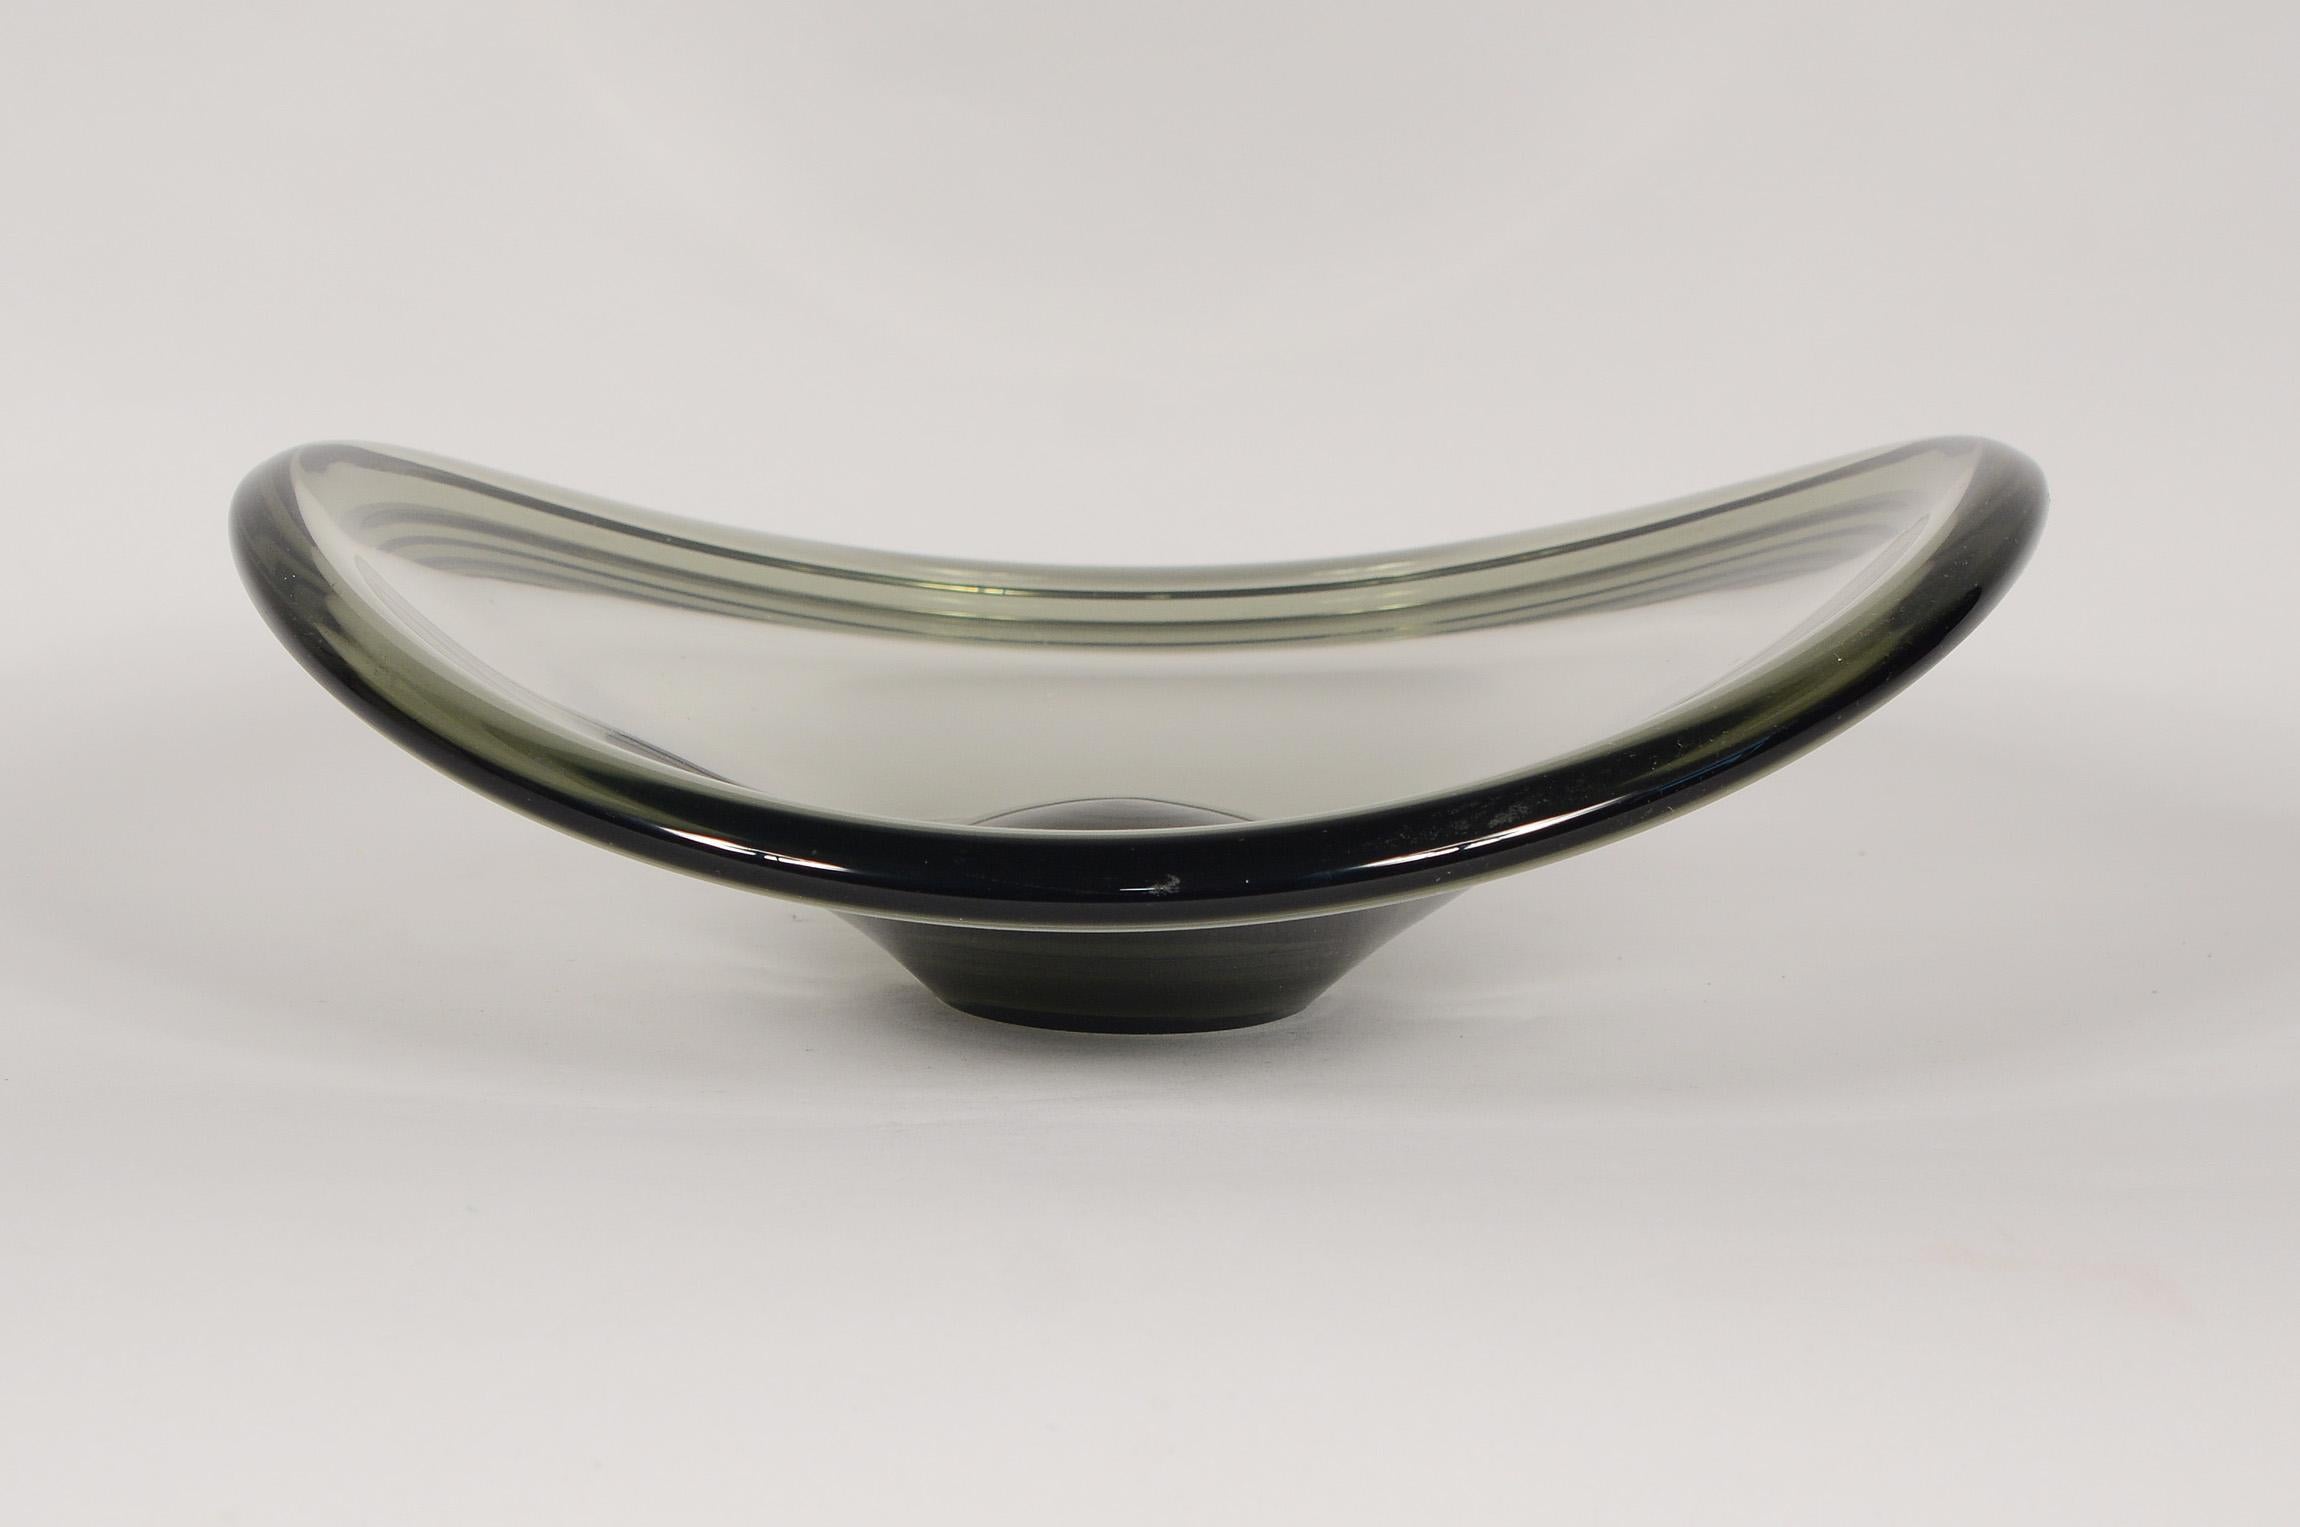 Low bowl smoked glass designed by Per Lutken for Holmegaard. The bowl is dated 1961.